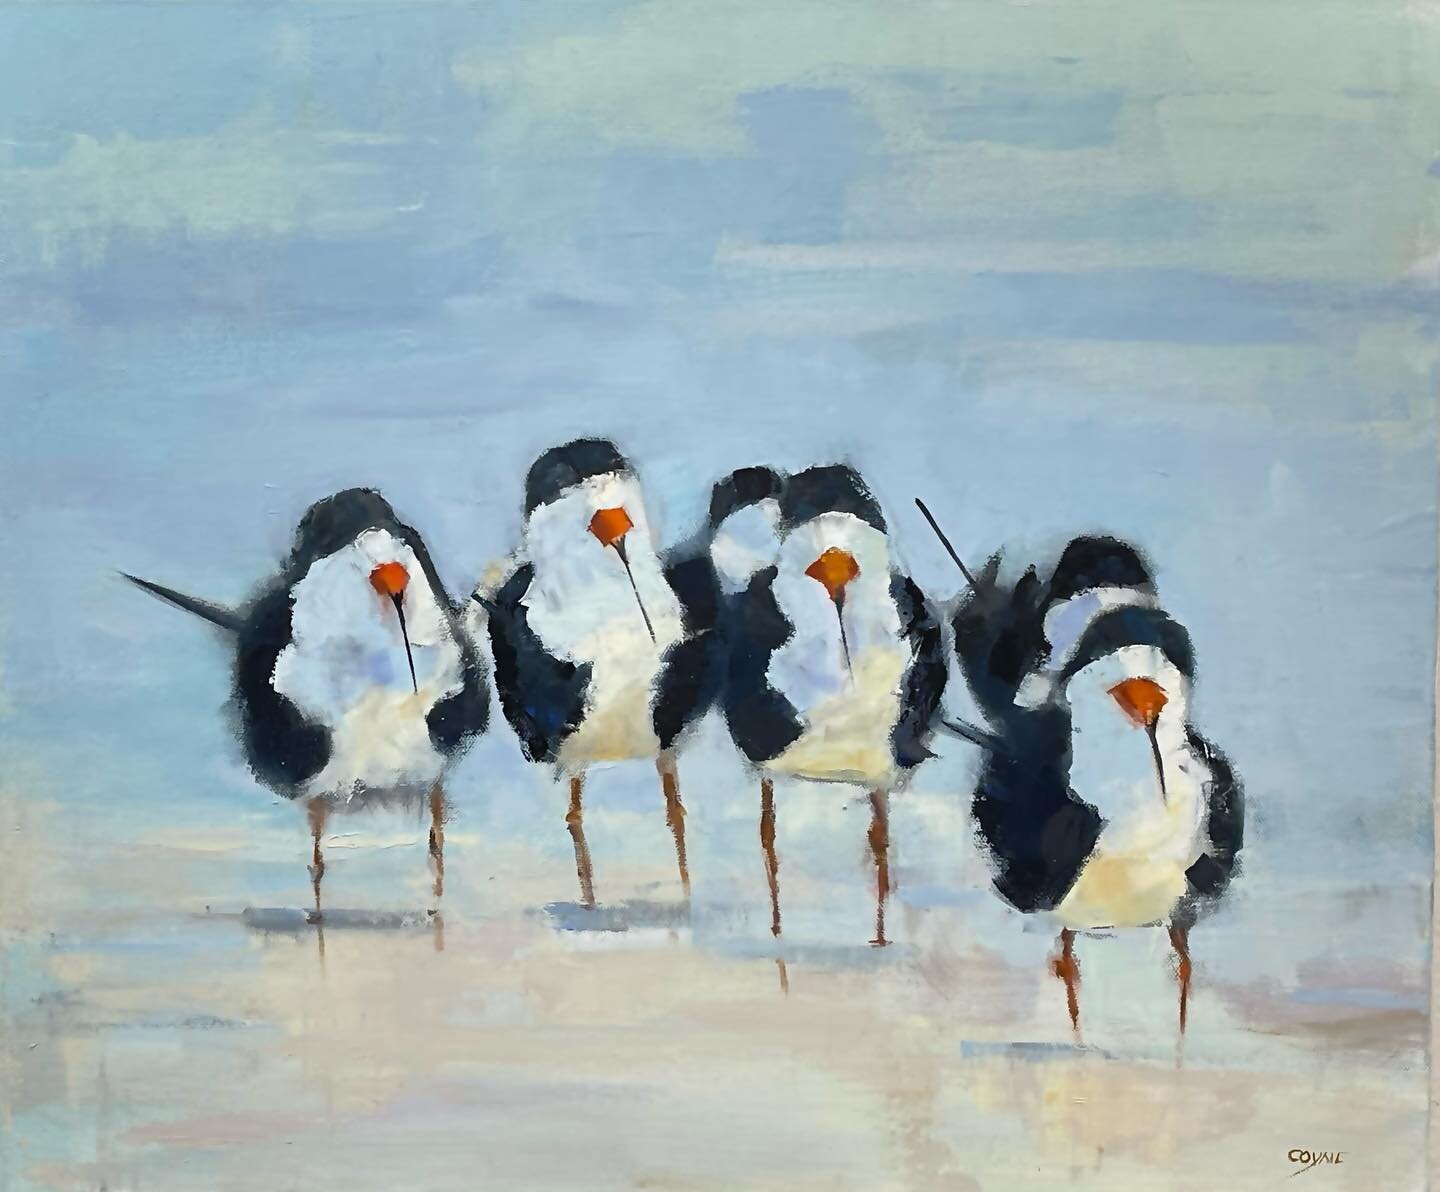 &lsquo;Skimmer Dippers&rsquo;. Love these funny birds. #floridabirds #beachbirds #skimmers #flockofbirds #impressionisticpainting